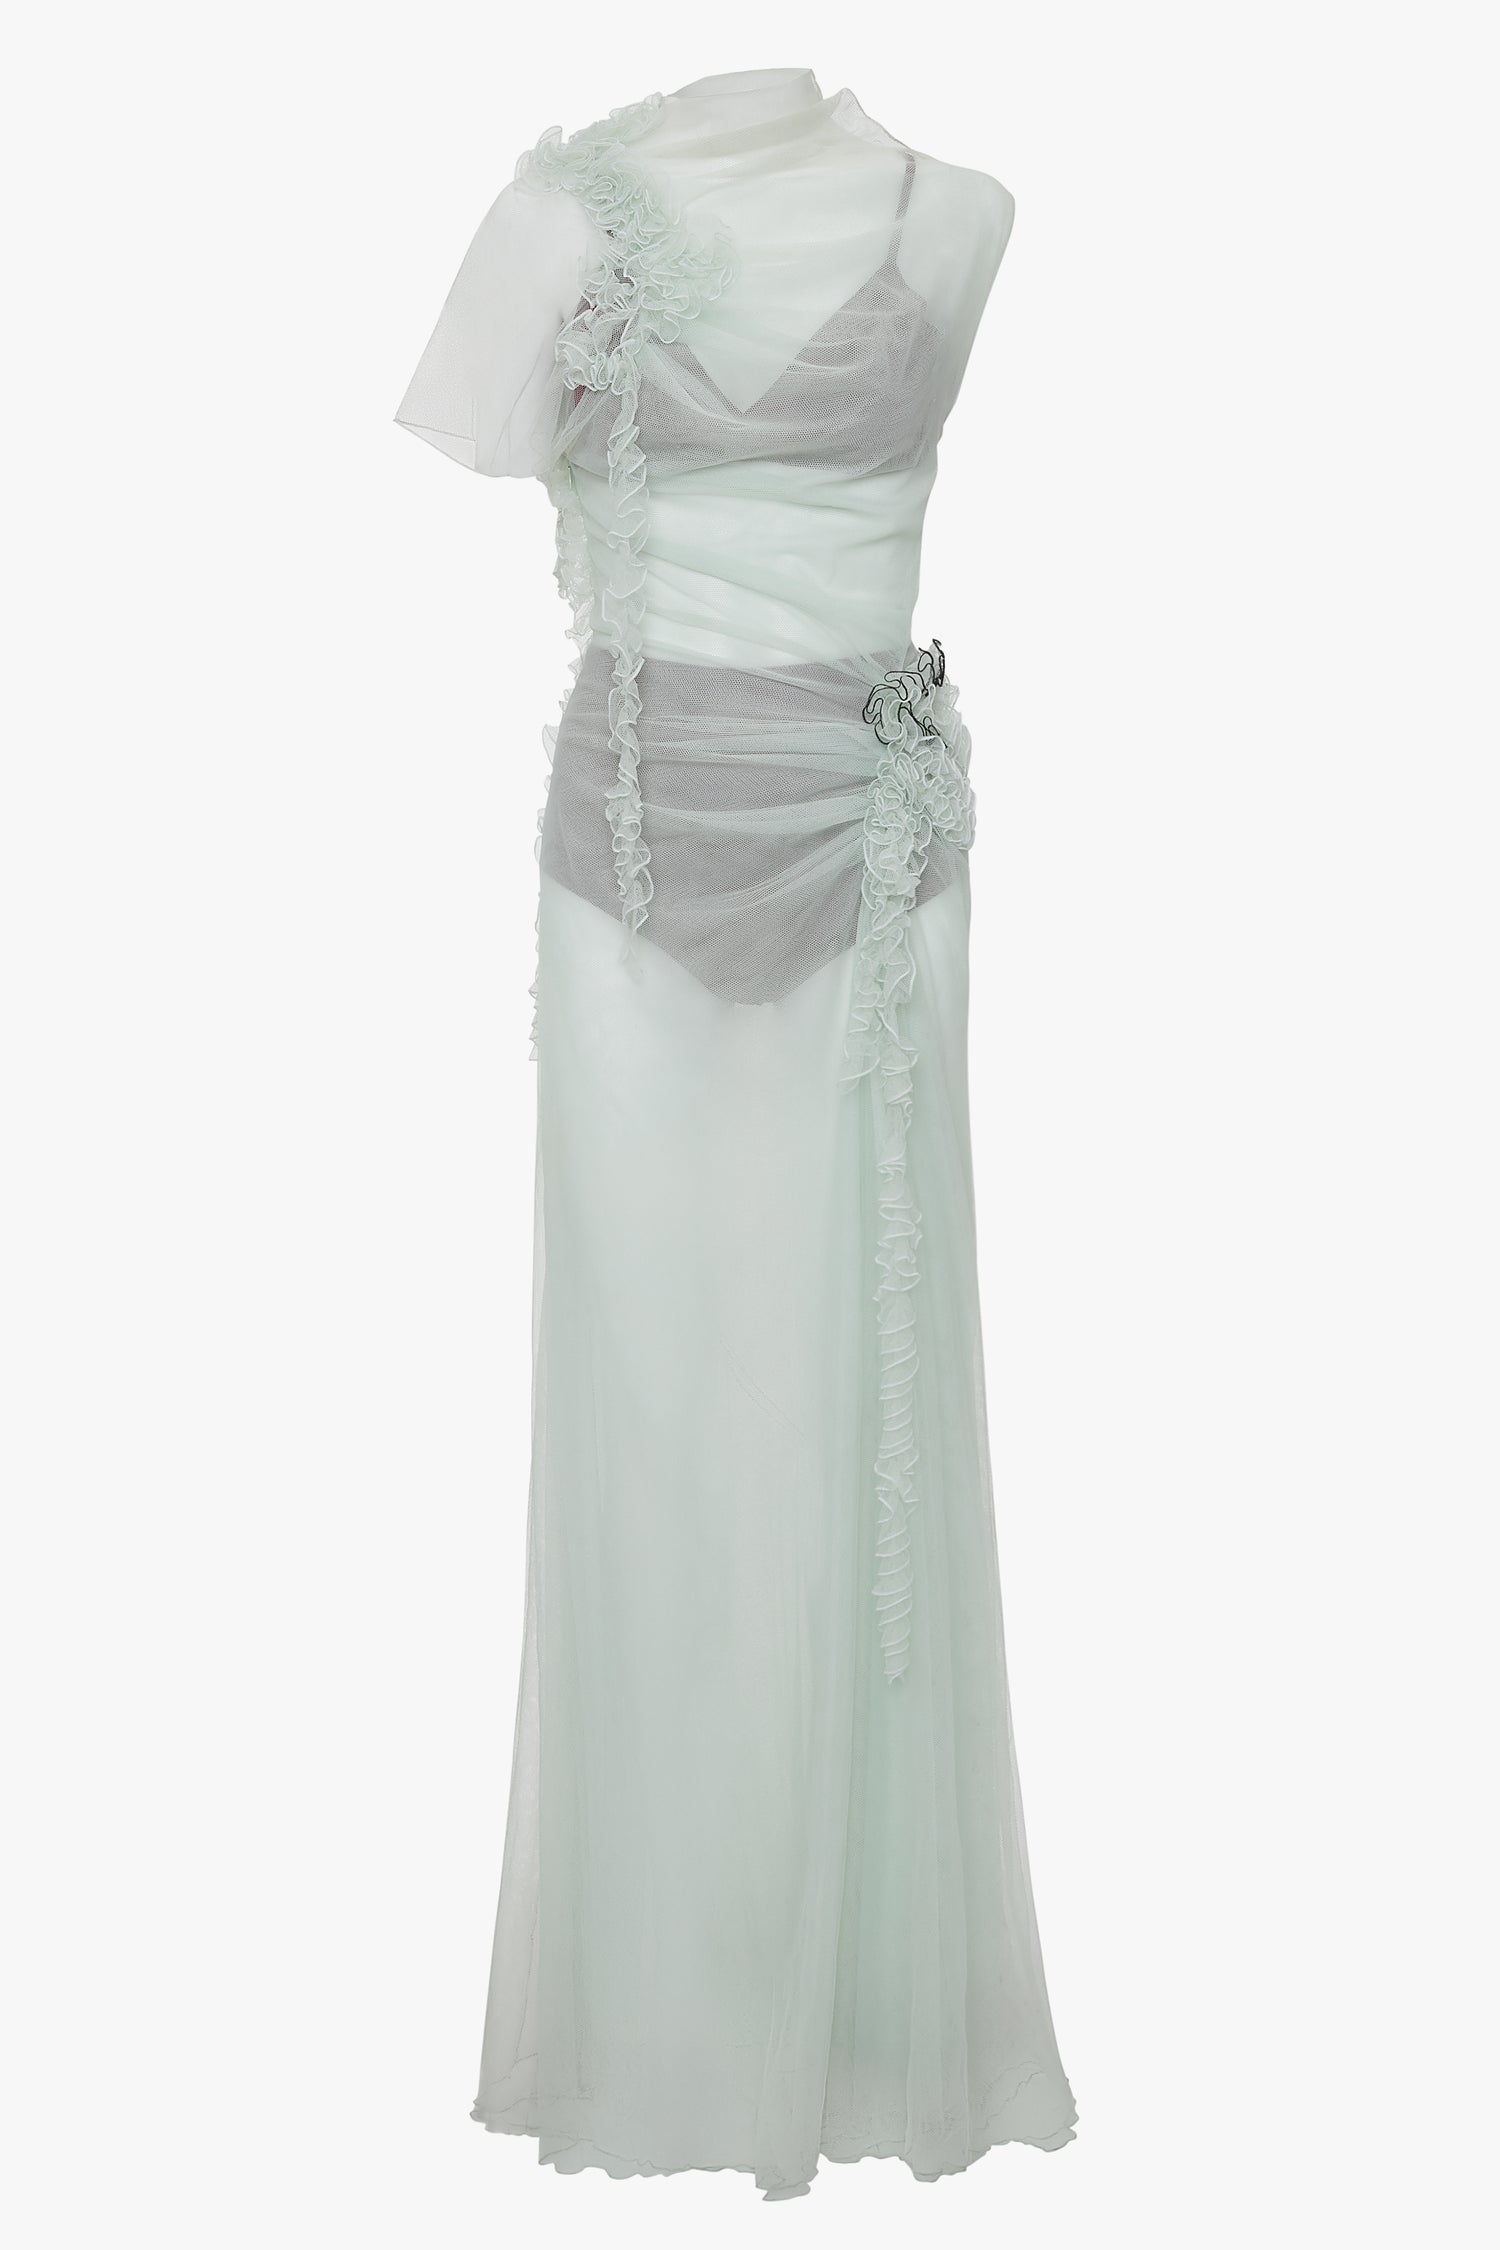 A Gathered Tulle Detail Floor-Length Dress In Jade with delicate ruffles and sheer fabric overlaying a slip, featuring asymmetrical design elements and a decorative floral accent at the waist. This ethereal gown can be found on VictoriaBeckham.com.